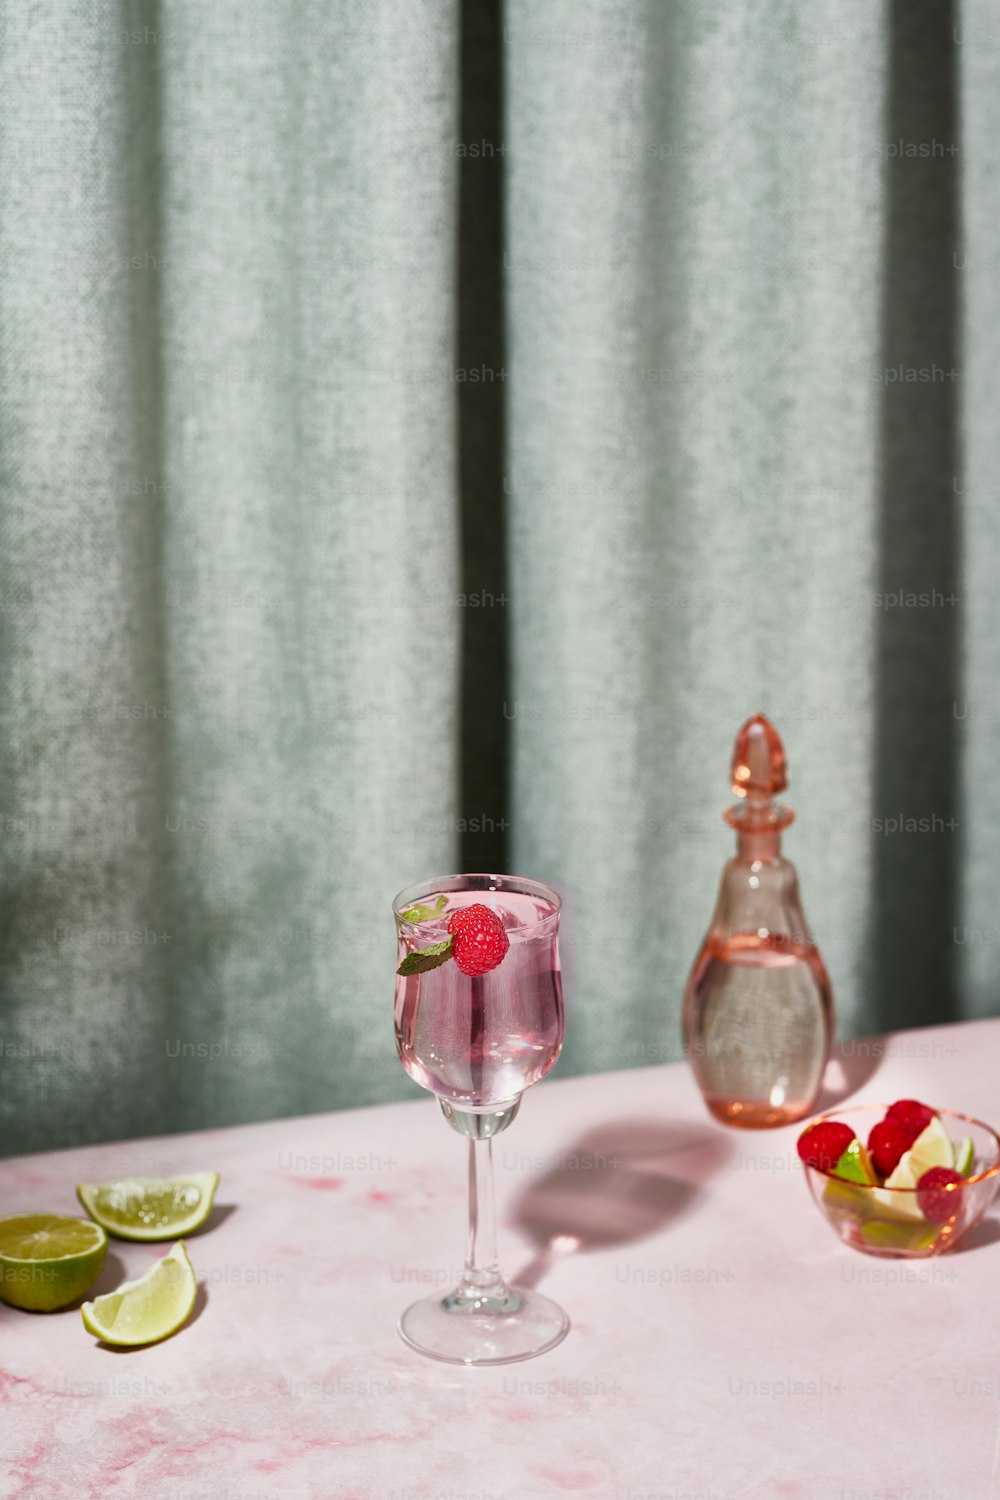 a pink table topped with a wine glass filled with liquid